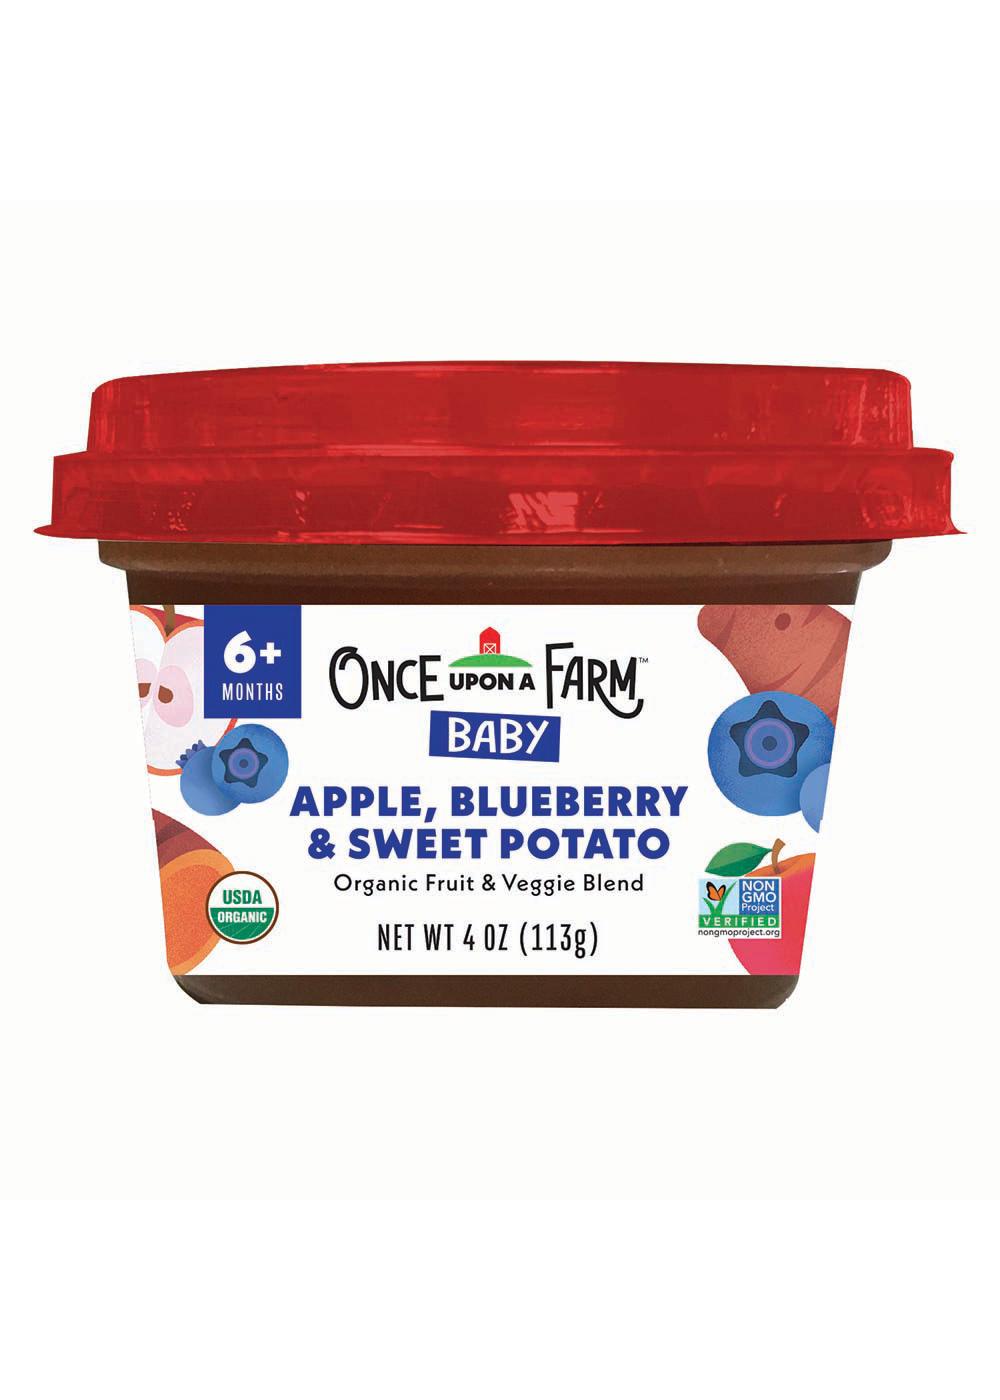 Once Upon a Farm Organic Baby Food - Apple Blueberry & Sweet Potato; image 1 of 2